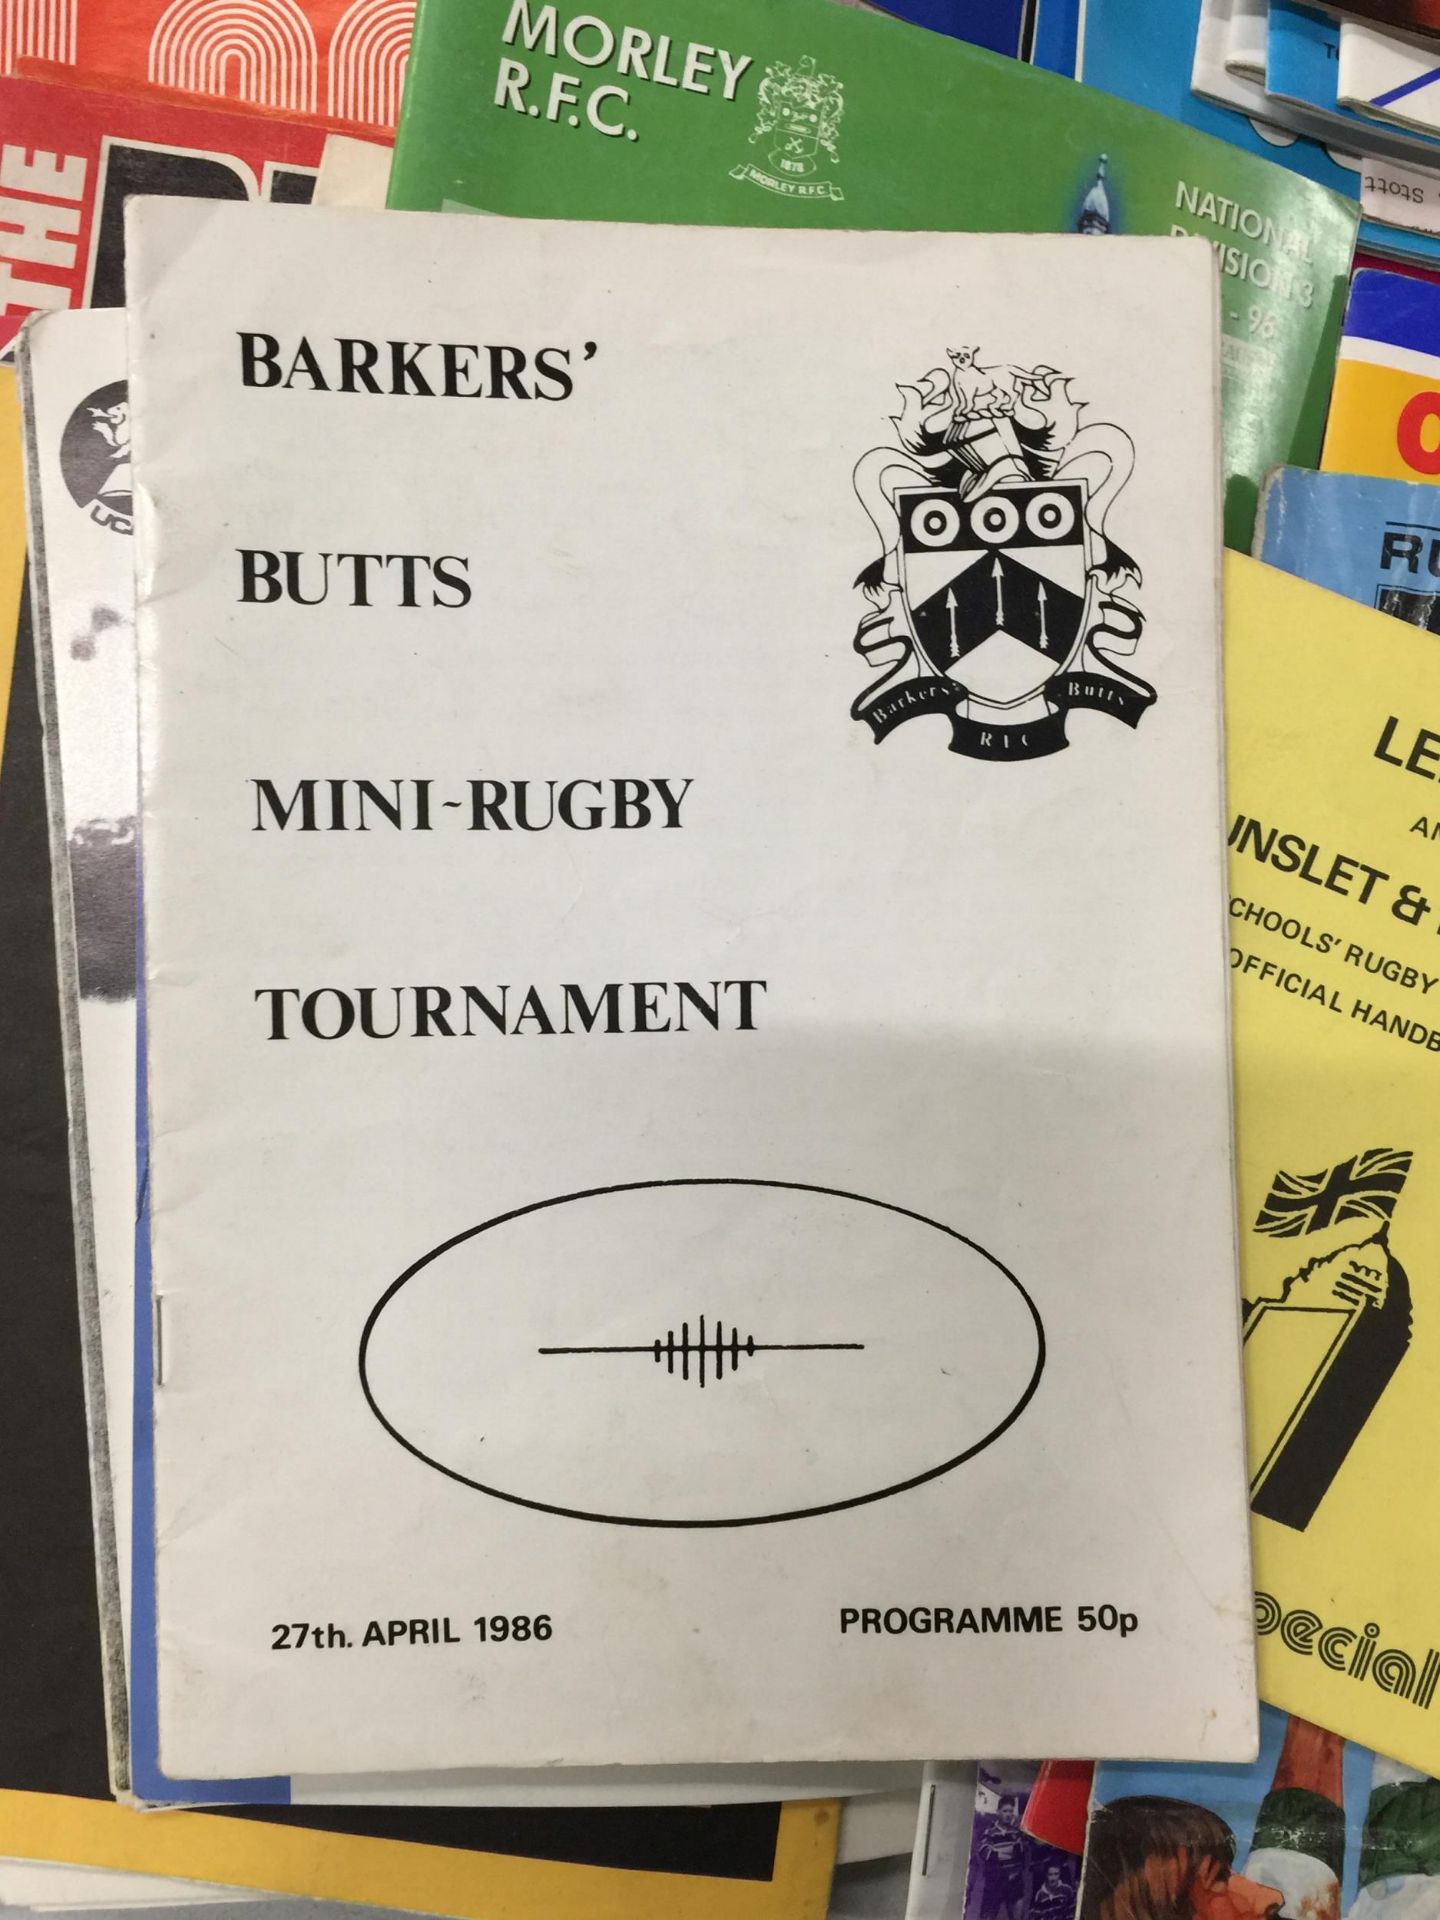 VARIOUS LOCAL AND NATIONAL TEAMS RUGBY UNION/FOOTBALL PROGRAMMES FROM 80'S AND 90'S - Image 6 of 6